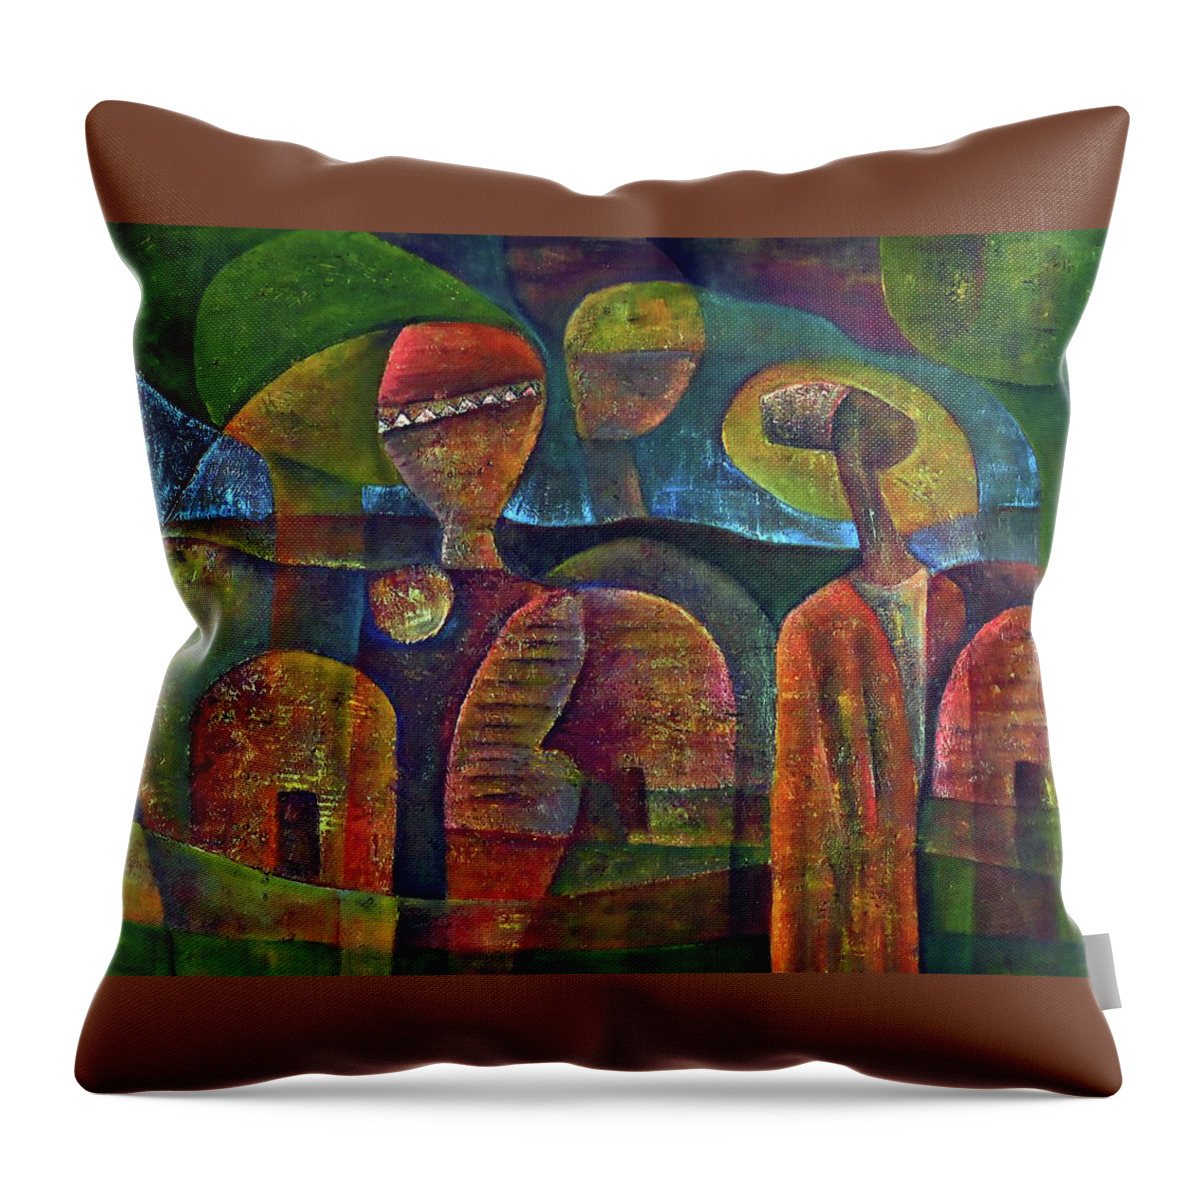 African Art Throw Pillow featuring the painting Travelers Then Came by Martin Tose 1959-2004